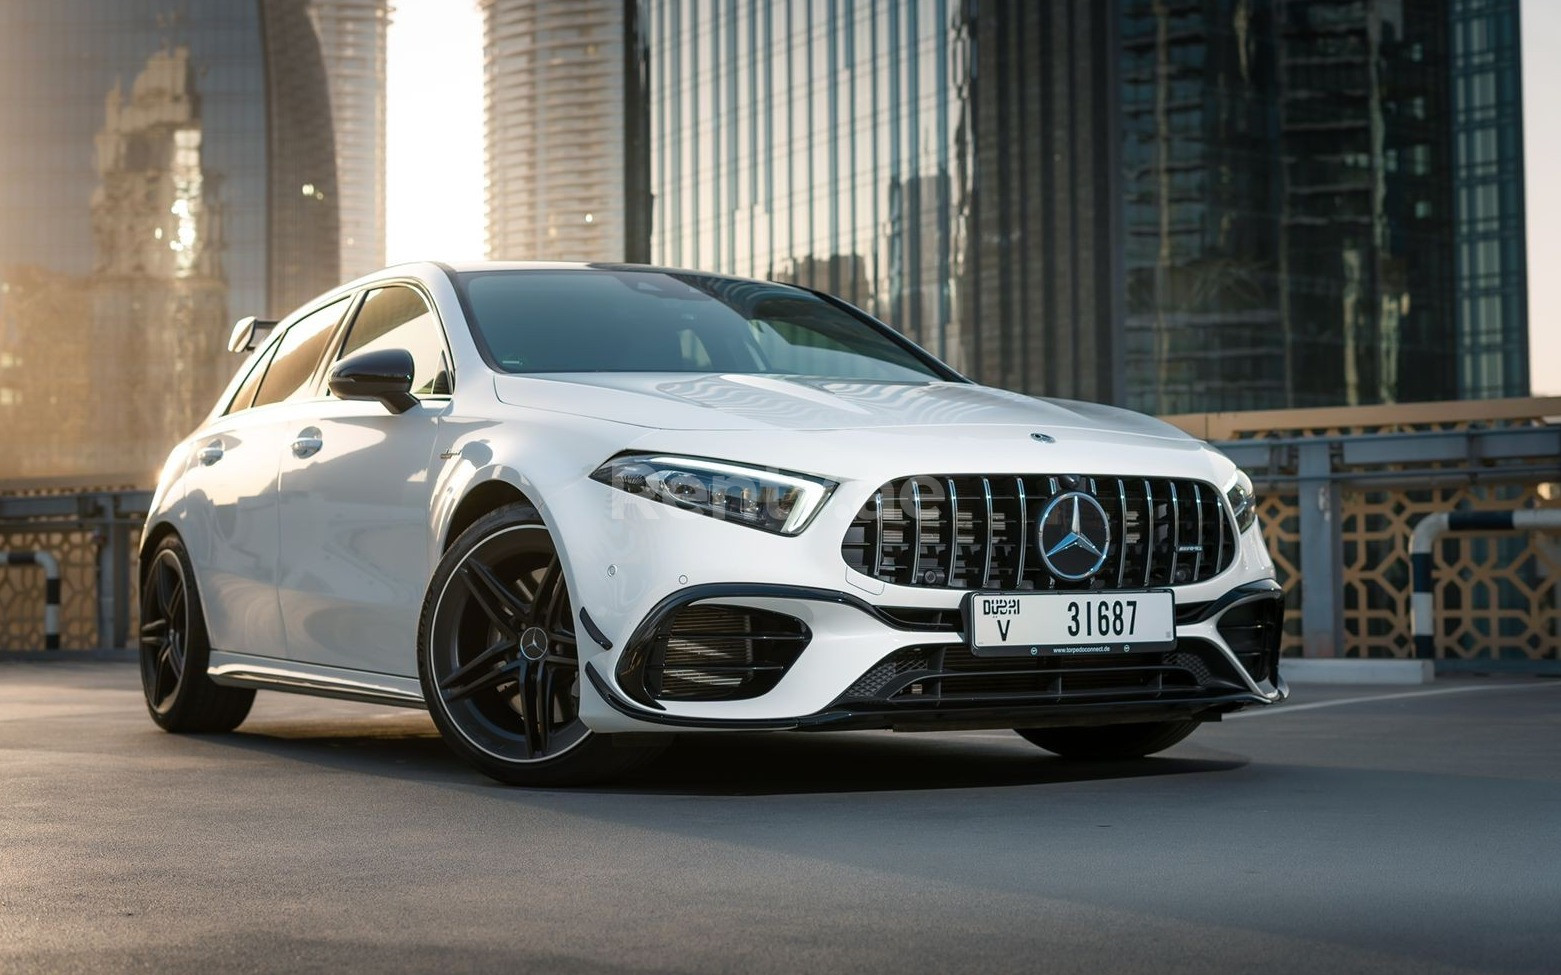 Mercedes A45 AMG (White), 2021 for rent in Dubai